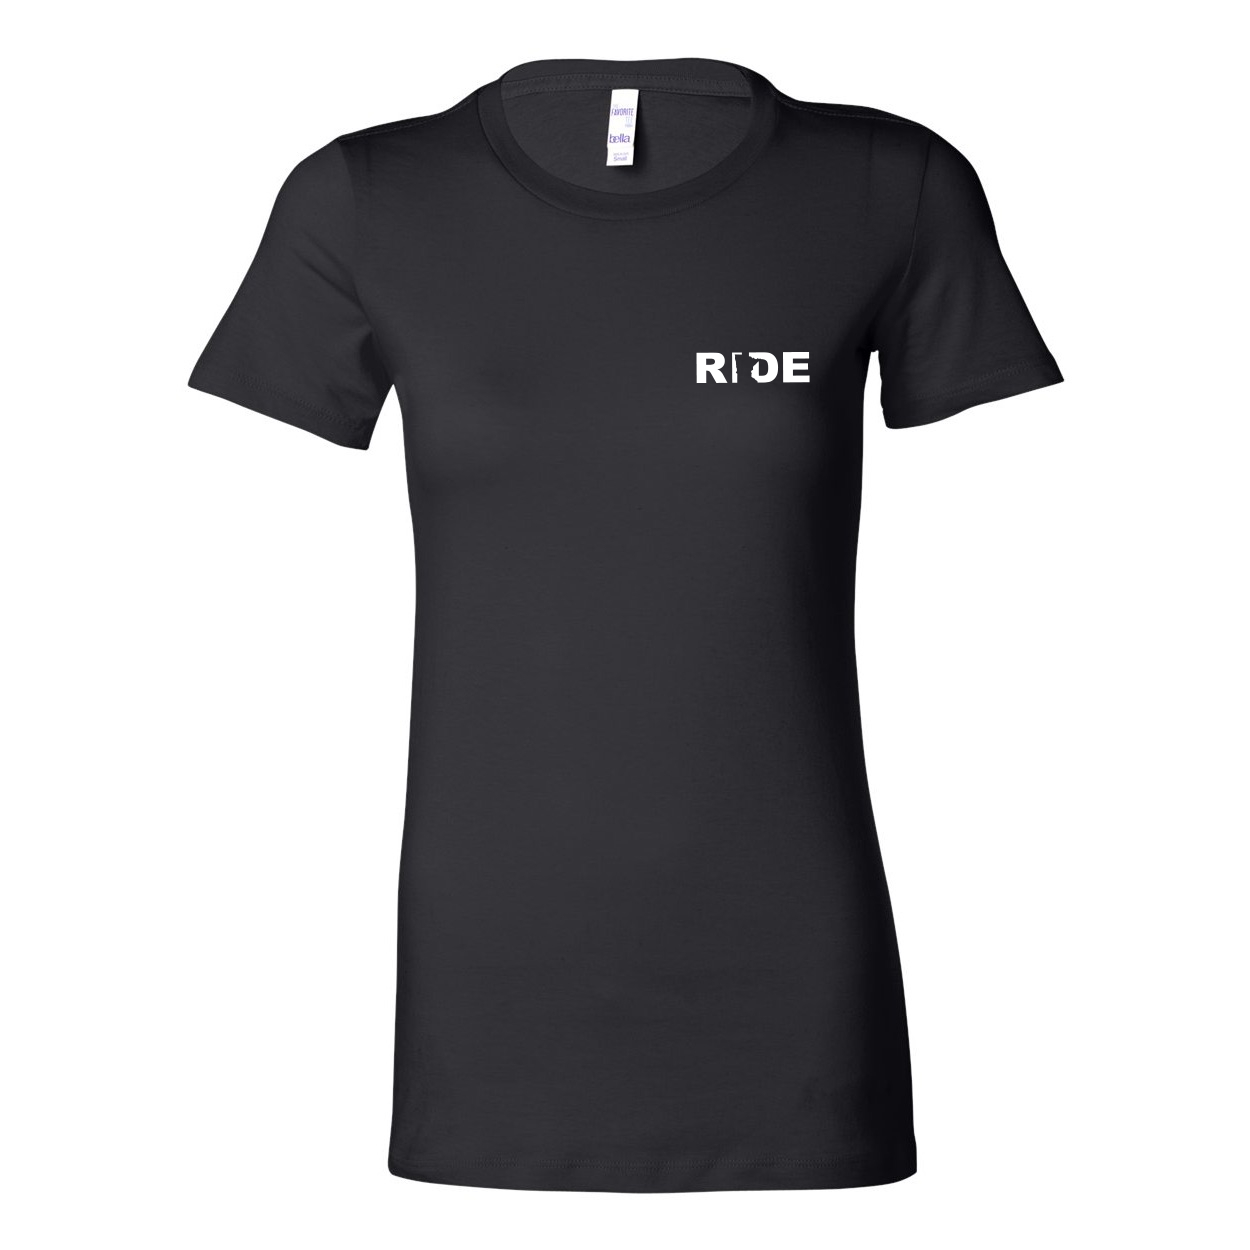 Ride Minnesota Women's Night Out Fitted Tri-Blend T-Shirt Black (White Logo)